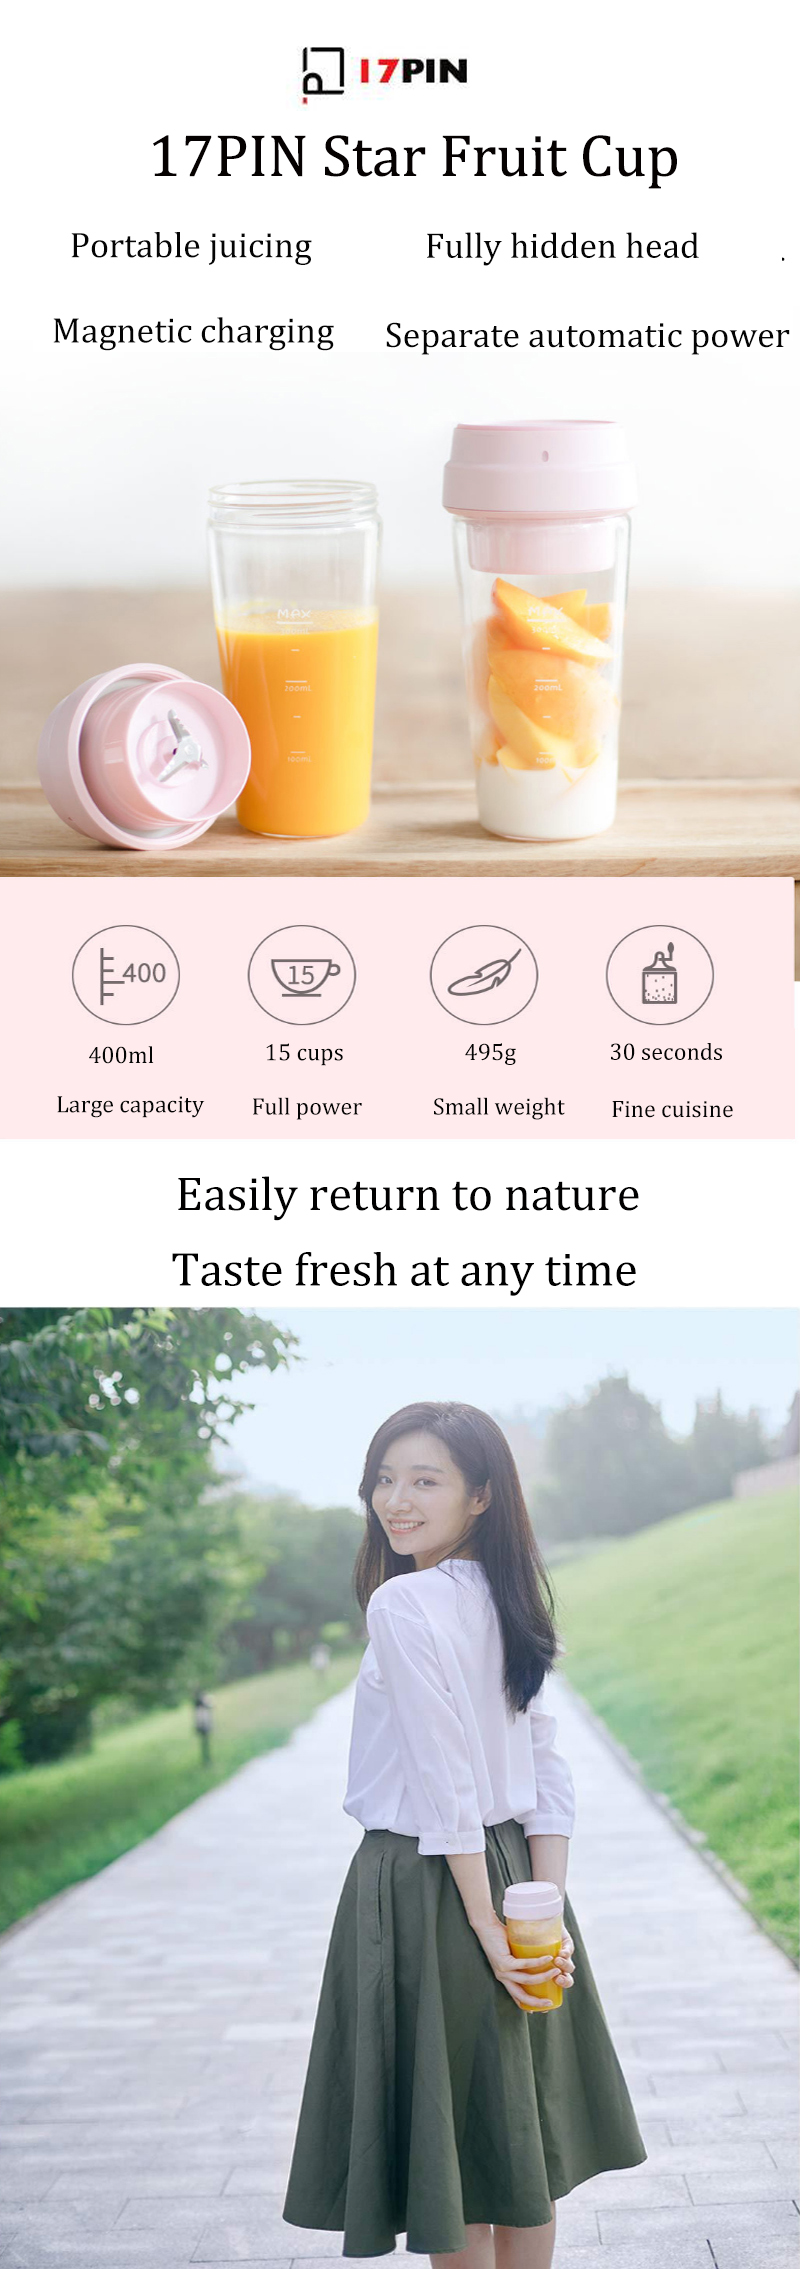 17PIN 400ML Star Fruit Juicer Bottle Portable DIY Juicing Extracter Cup Magnetic Charging From Xiaomi Youpin